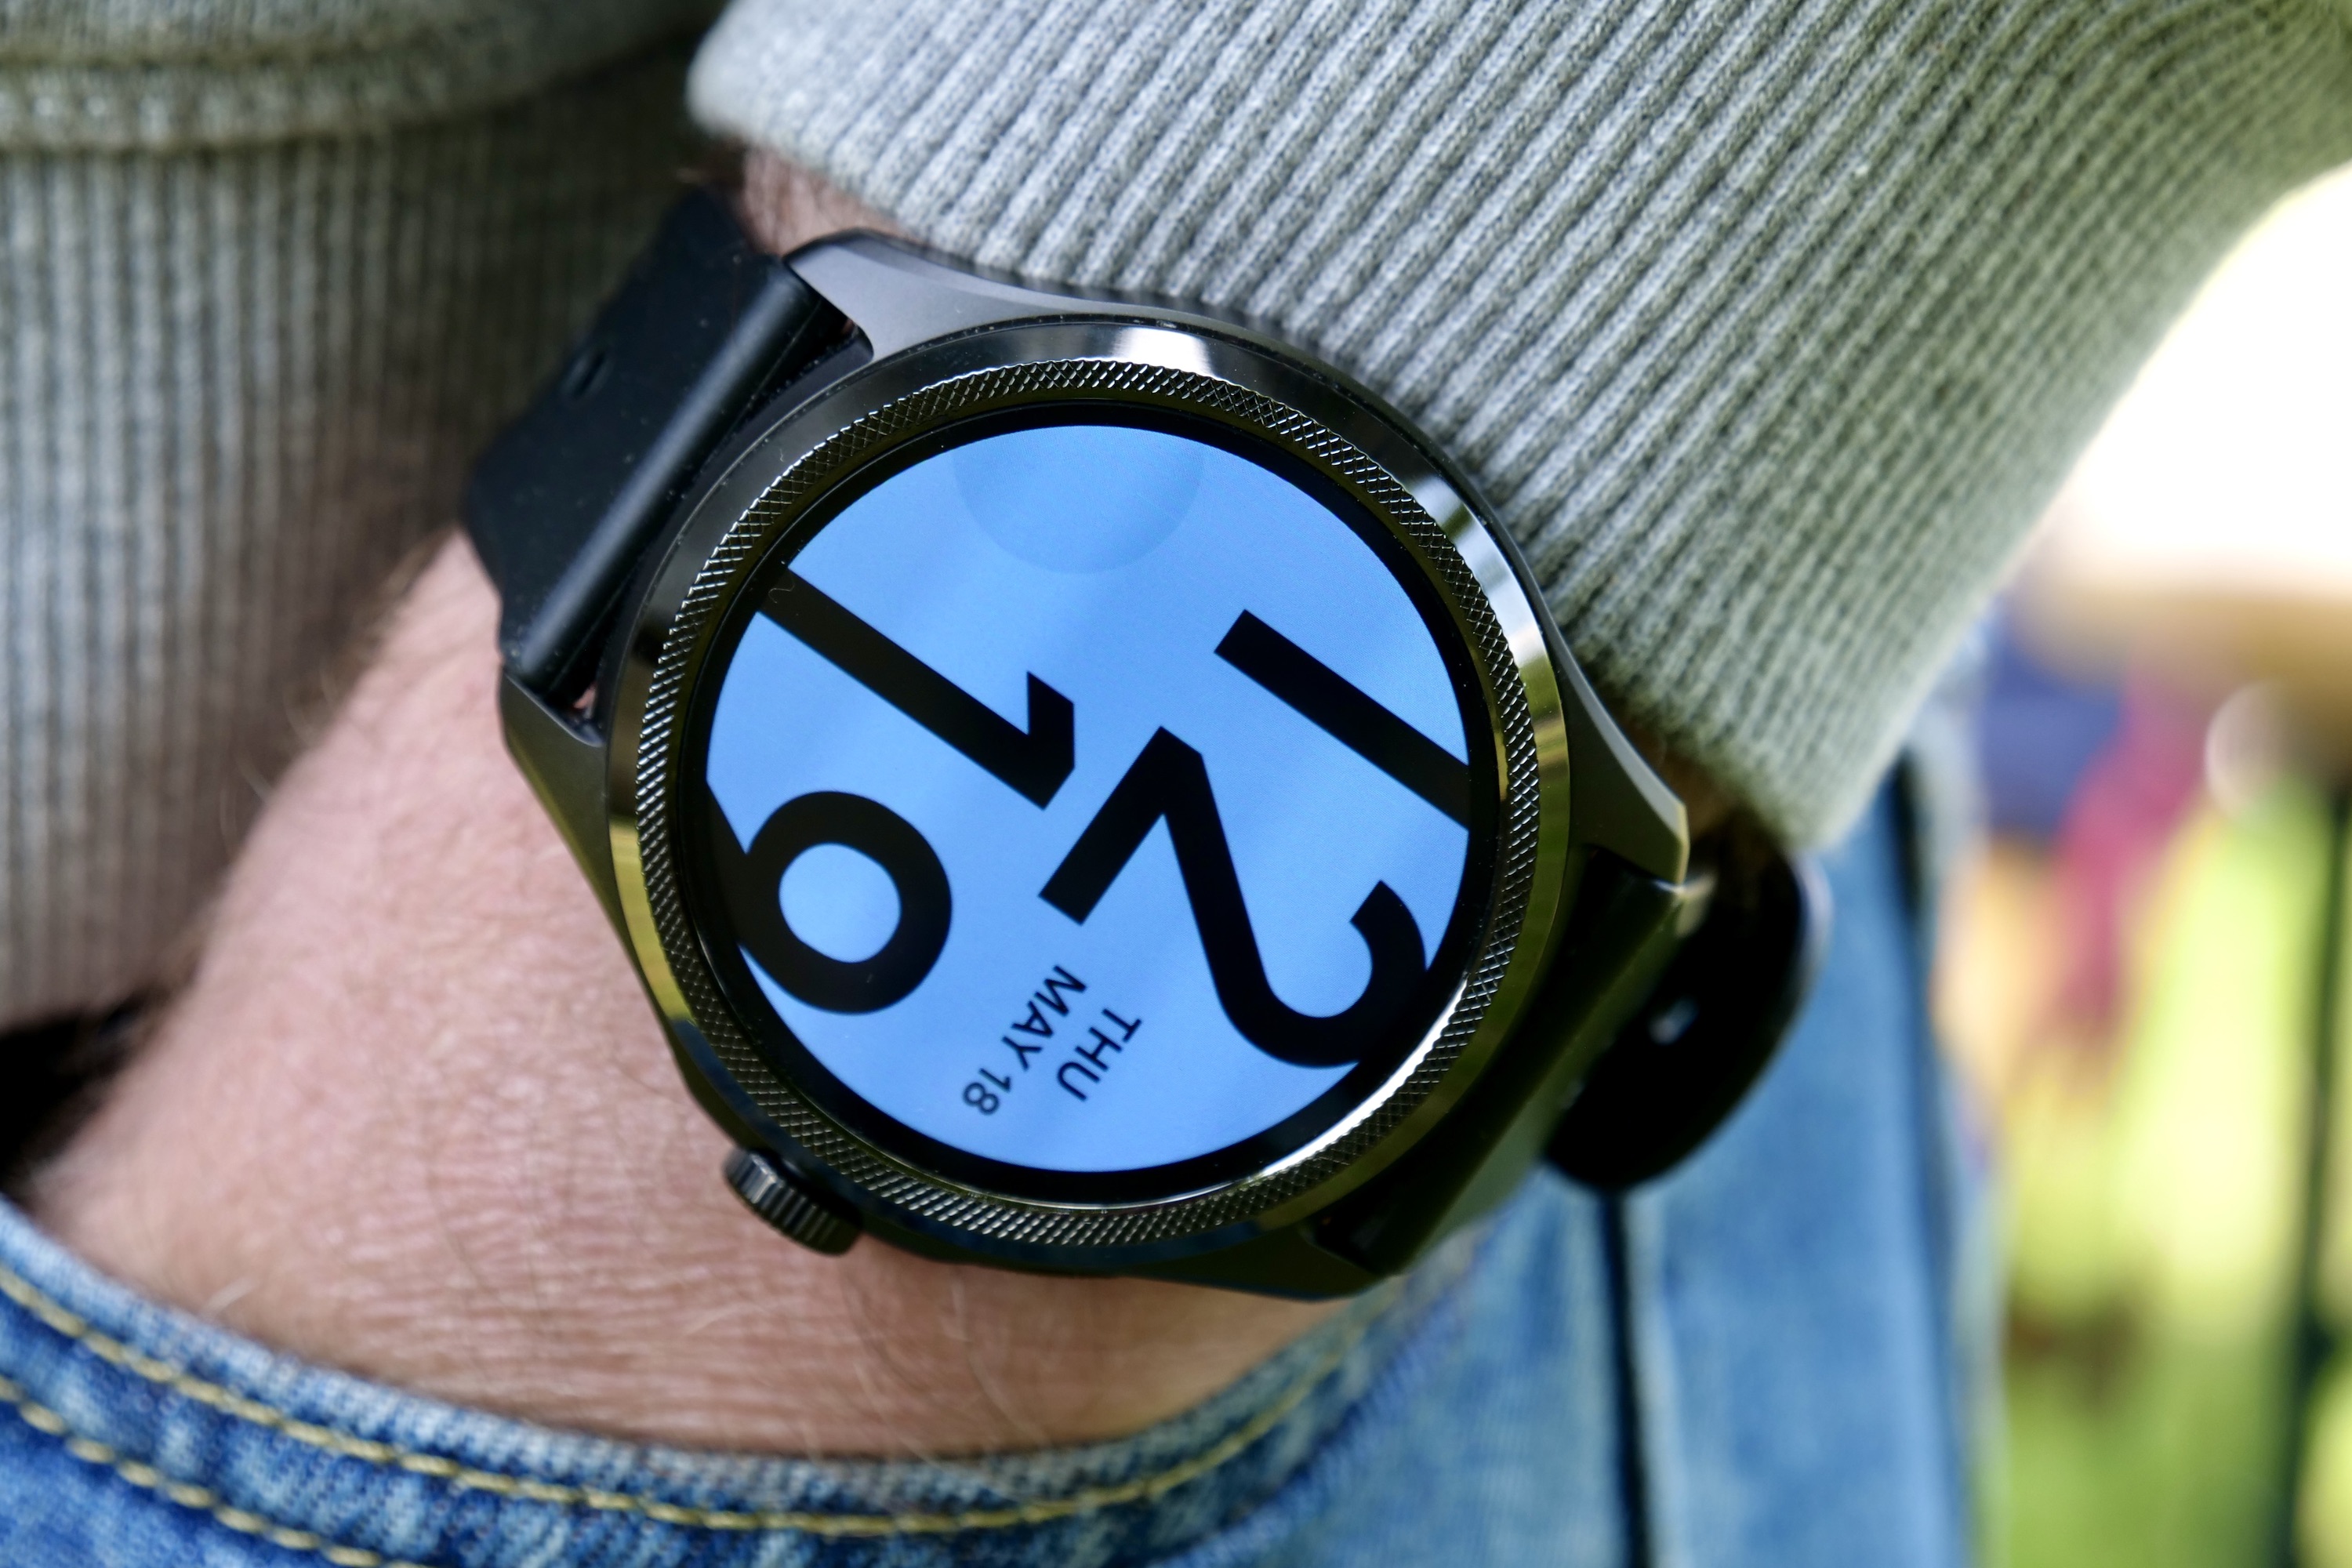 The Mobvoi TicWatch Pro 5 on a person's wrist.